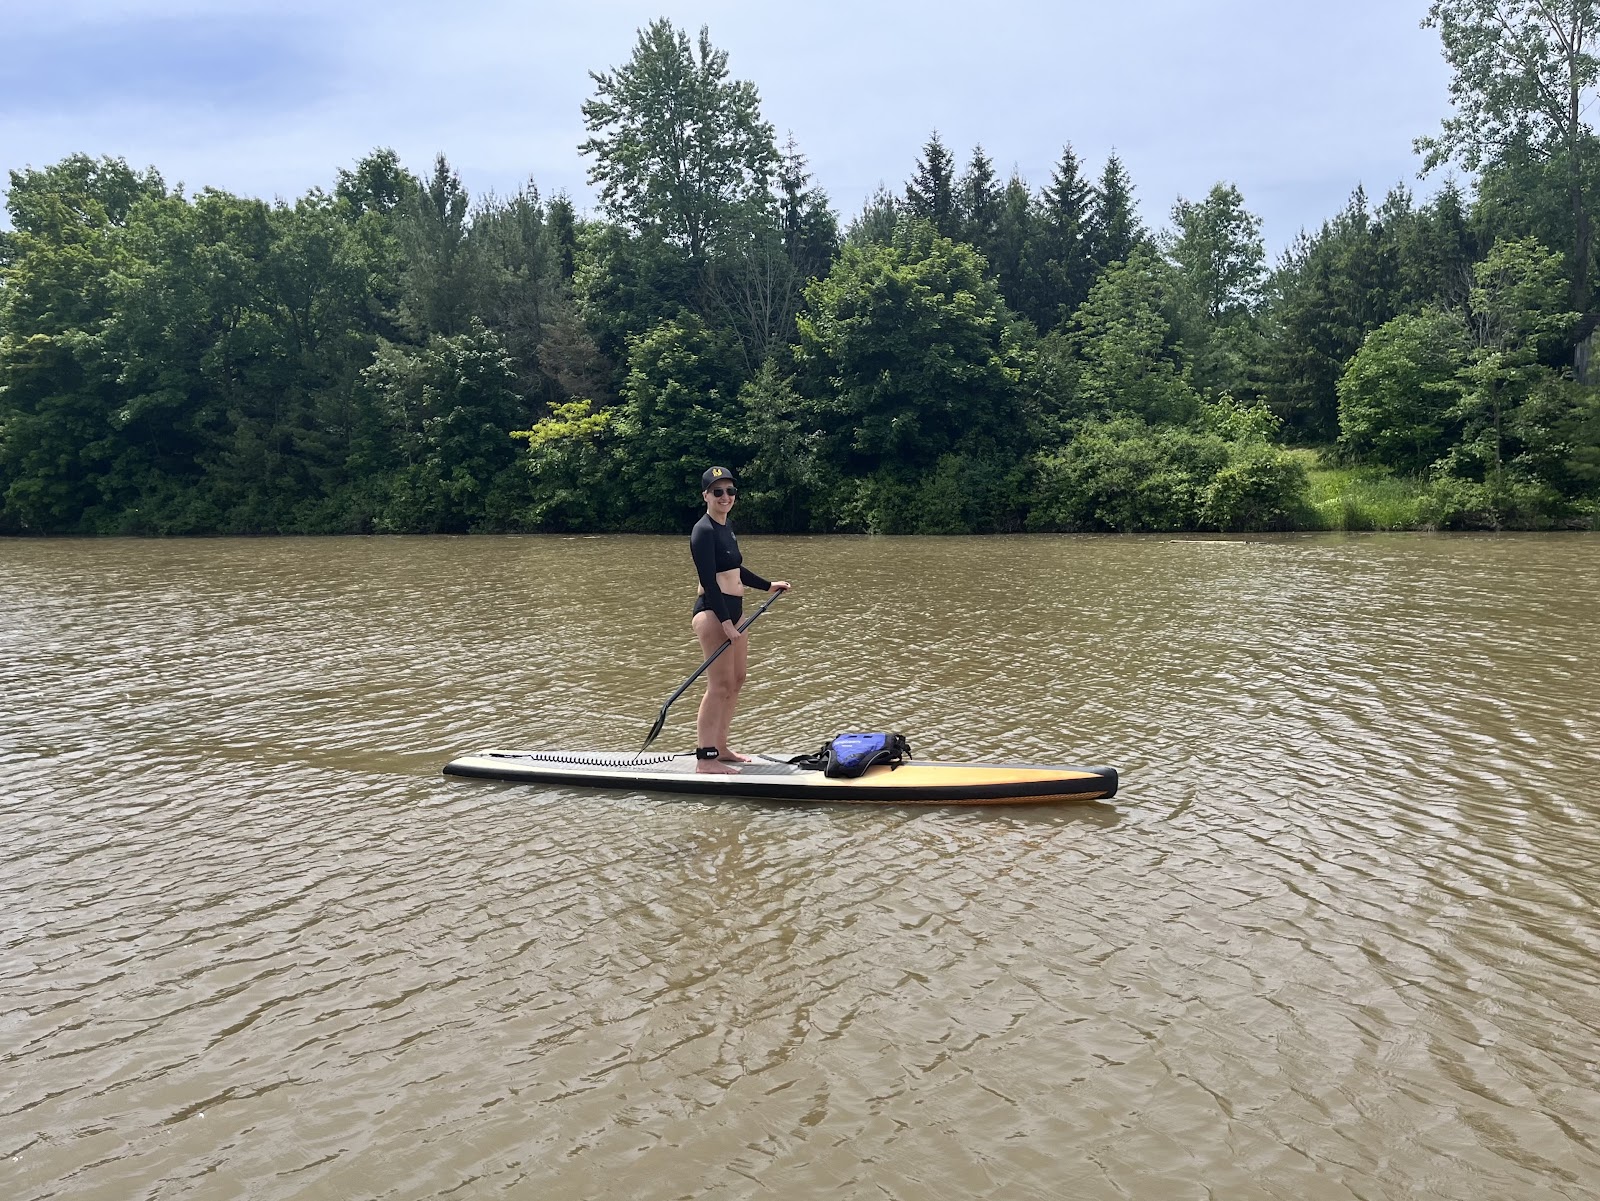 Tarzan paddles on a calm lake or river surrounded by lush green trees and forests. She is wearing a black top and shorts and is standing and using a paddle on a large paddleboard while enjoying the peaceful, natural surroundings.